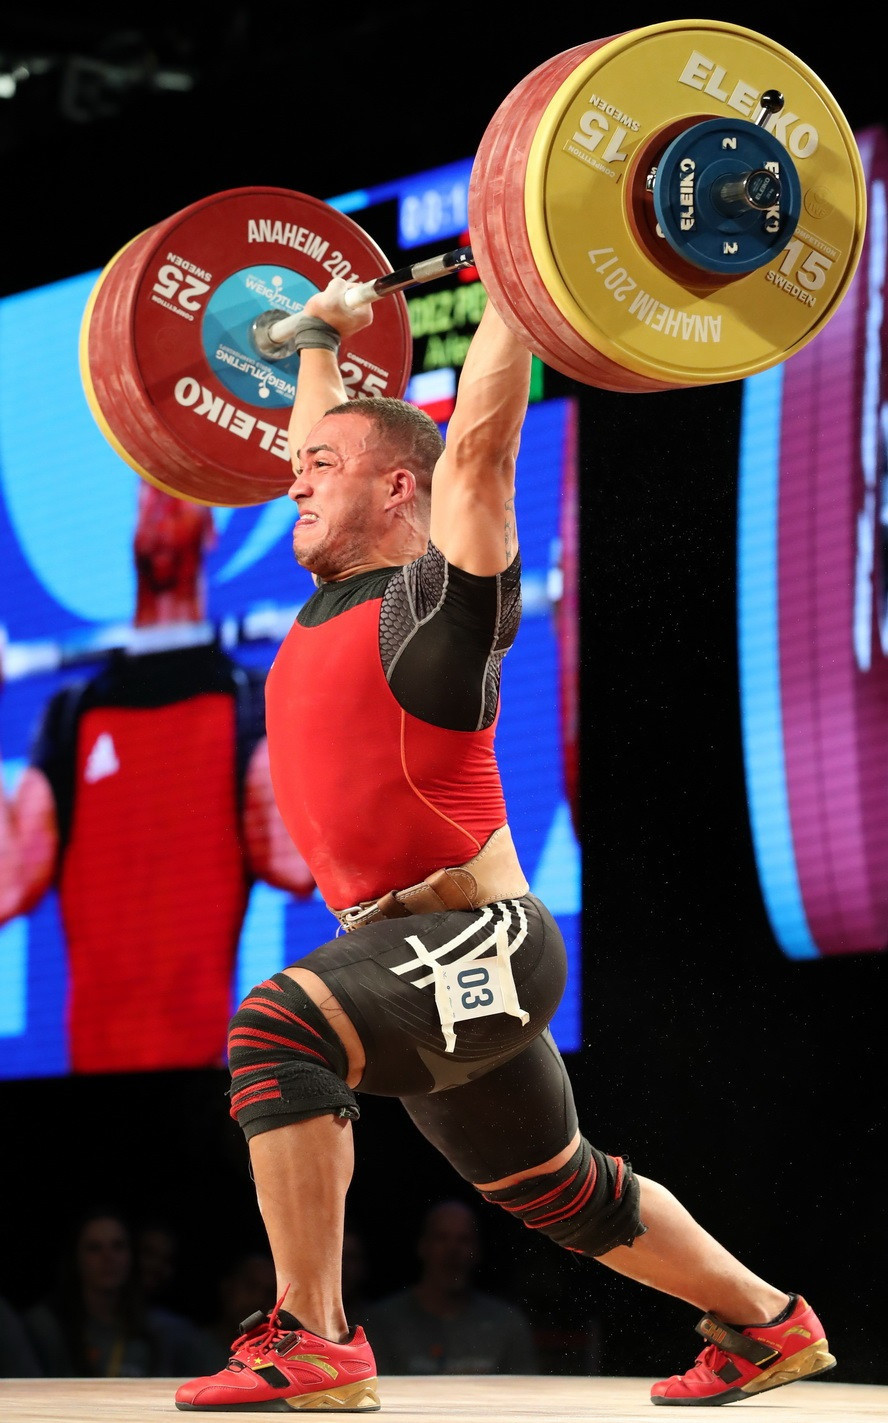 Chile's Arley Mendez Perez dominated the men's 85kg competition ©IWF